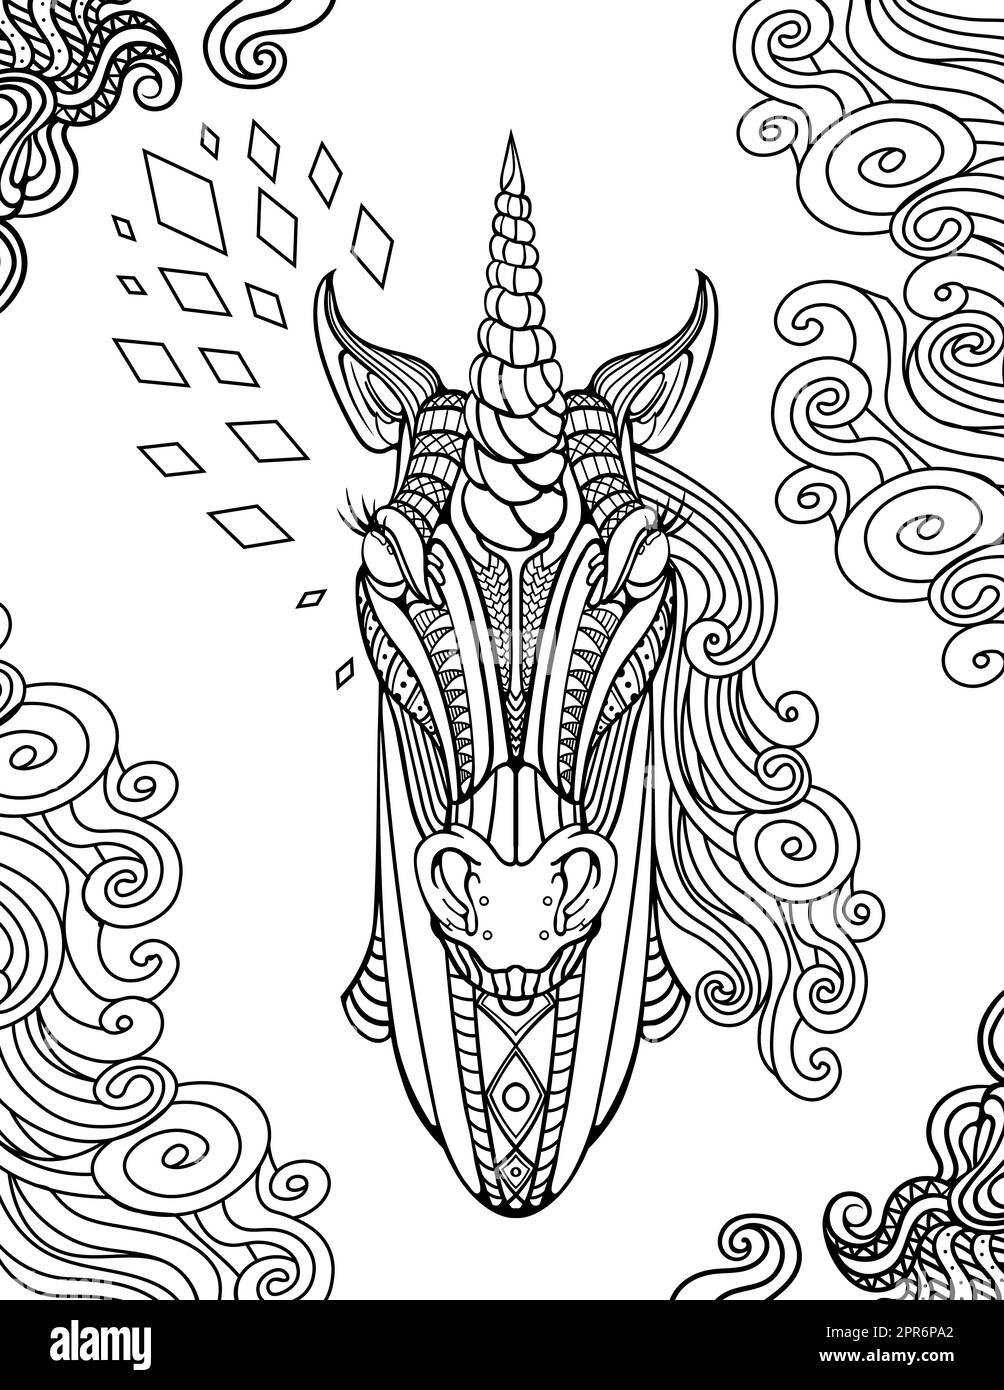 Unicorn Head Line Drawing Art Facing Front Surrounded With Wavy Lines. Stock Photo